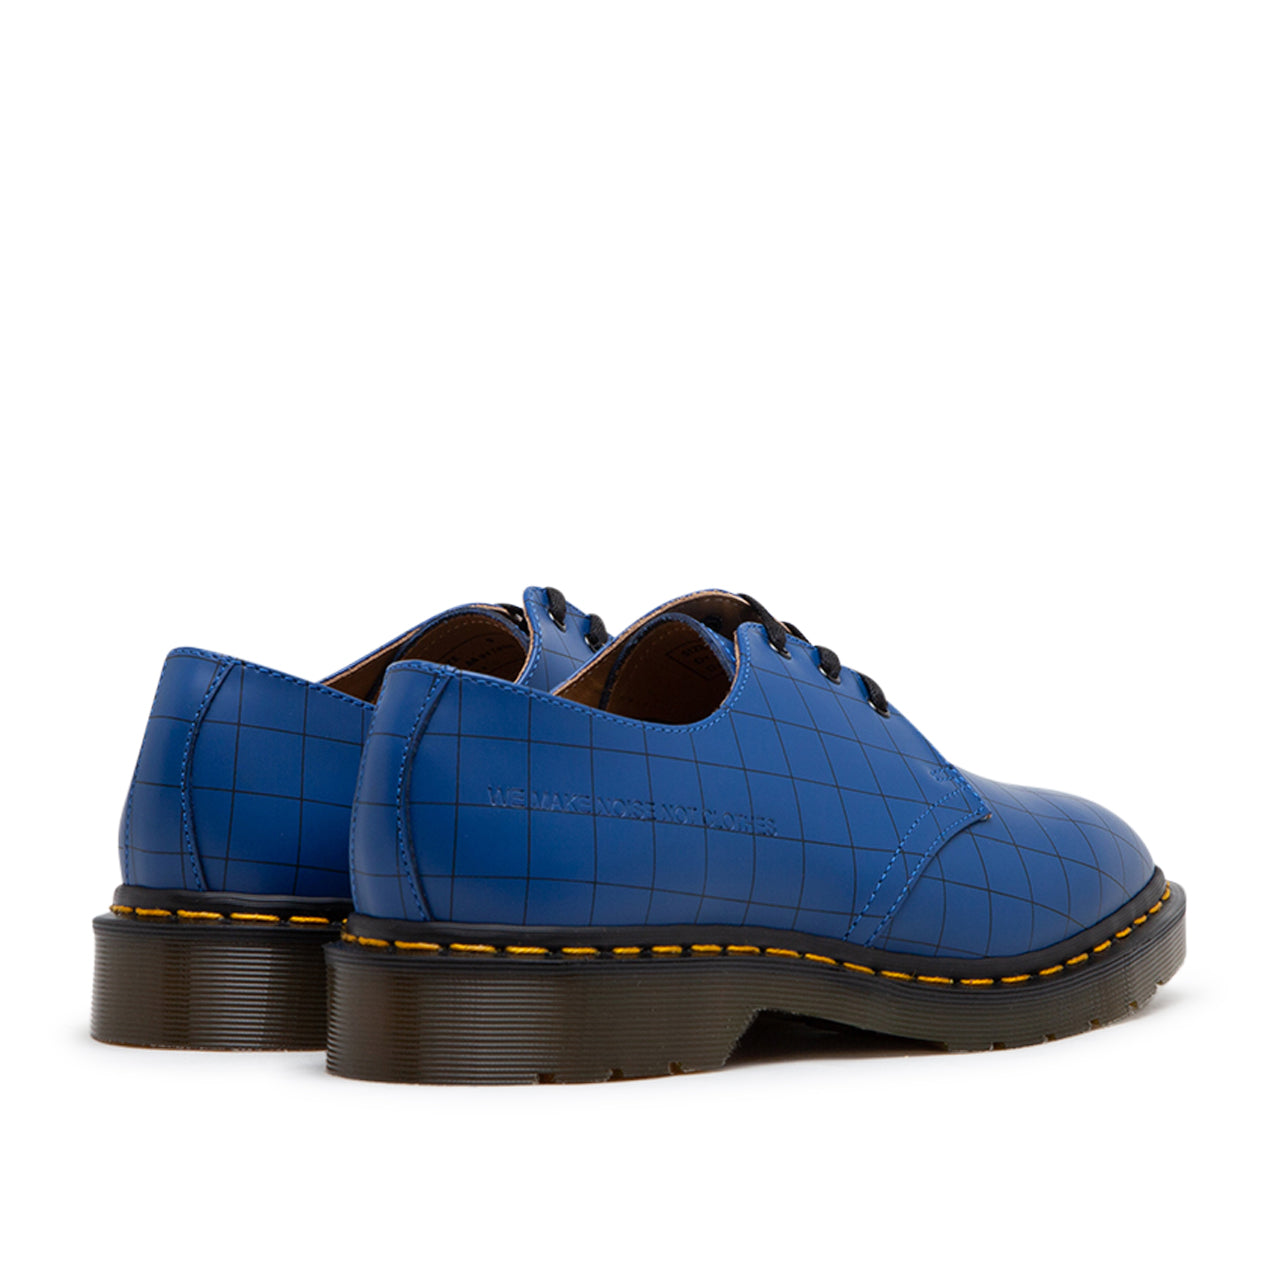 Dr. Martens x Undercover 1461 Check Smooth (Blue)